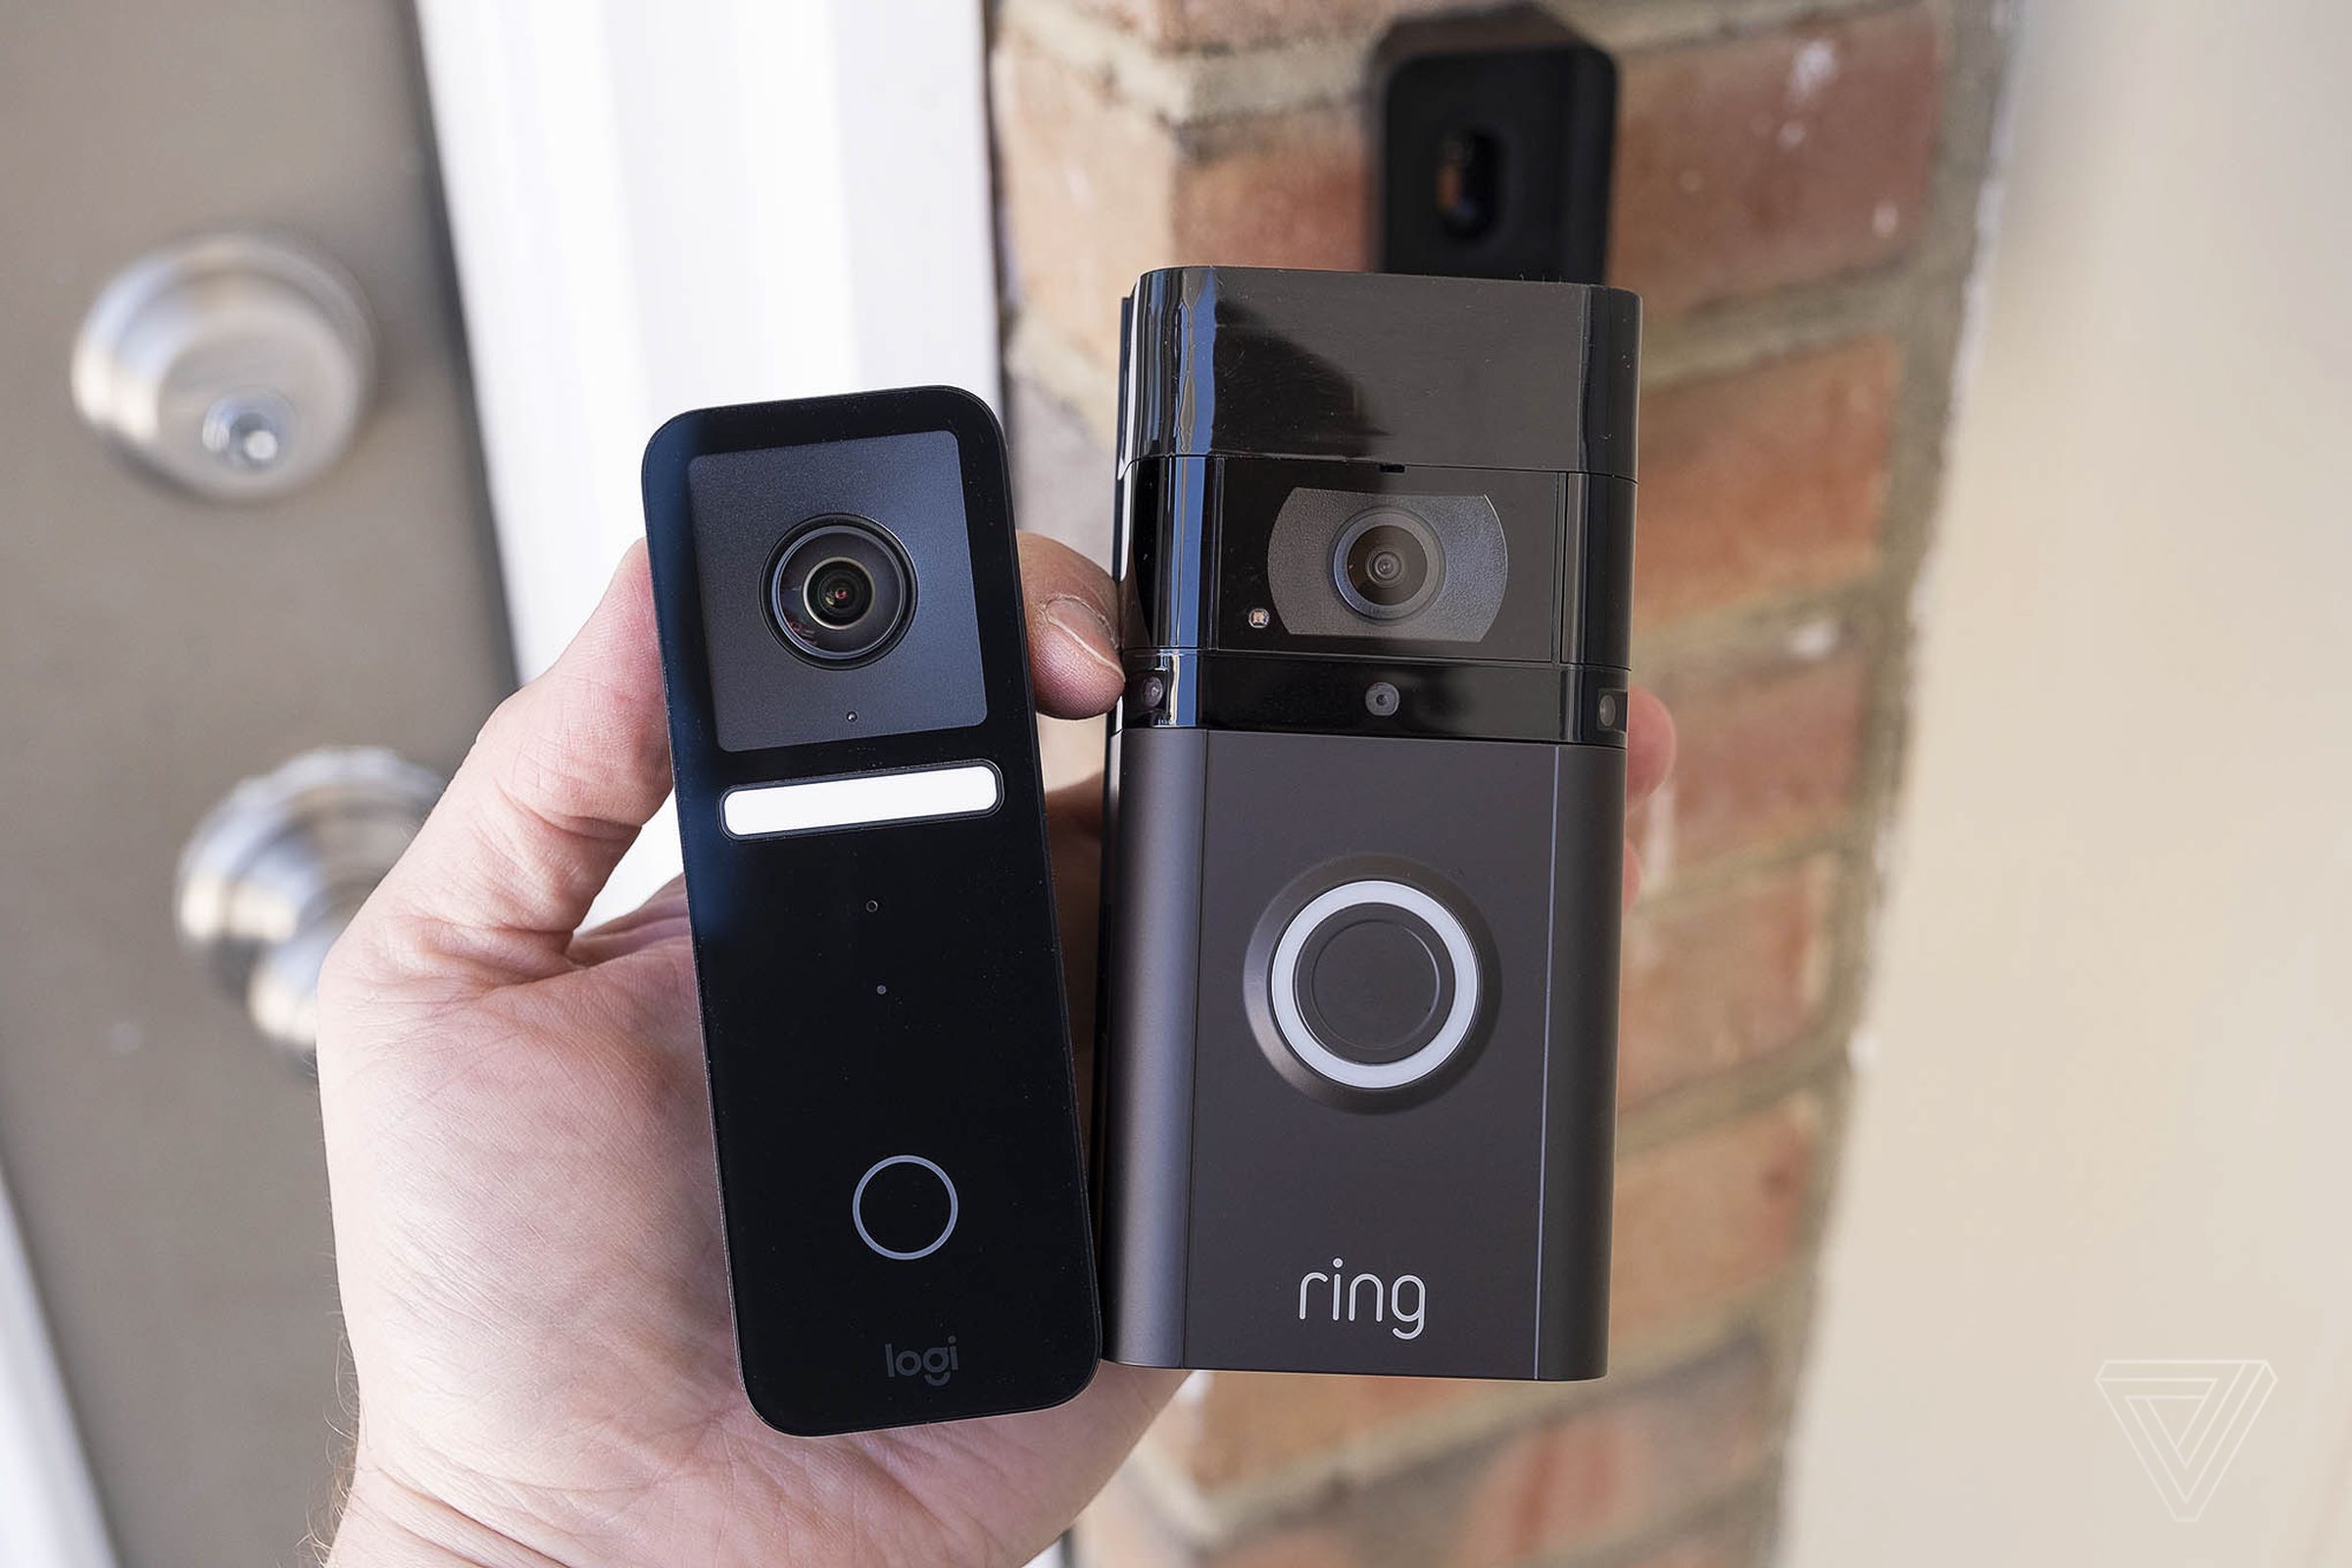 The Circle View is much smaller than battery-powered doorbells like the Ring Video Doorbell 3.